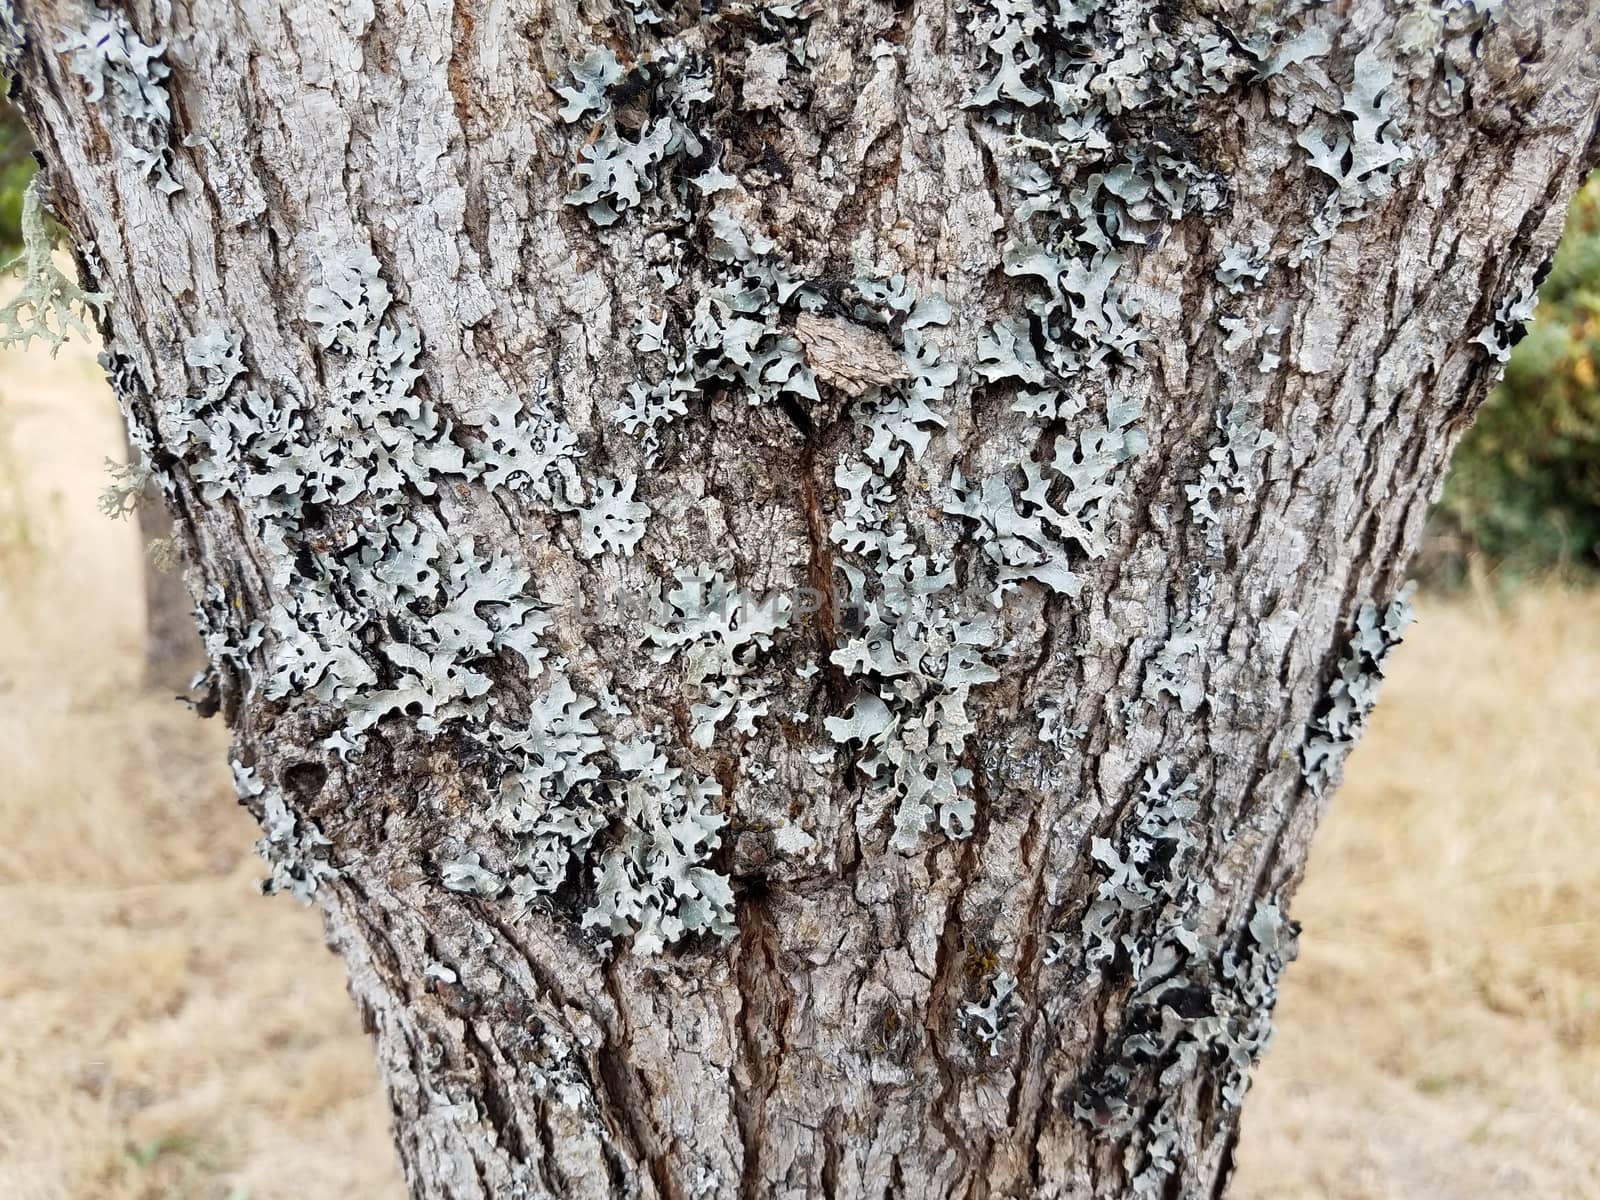 dry green and grey lichen on brown tree trunk bark